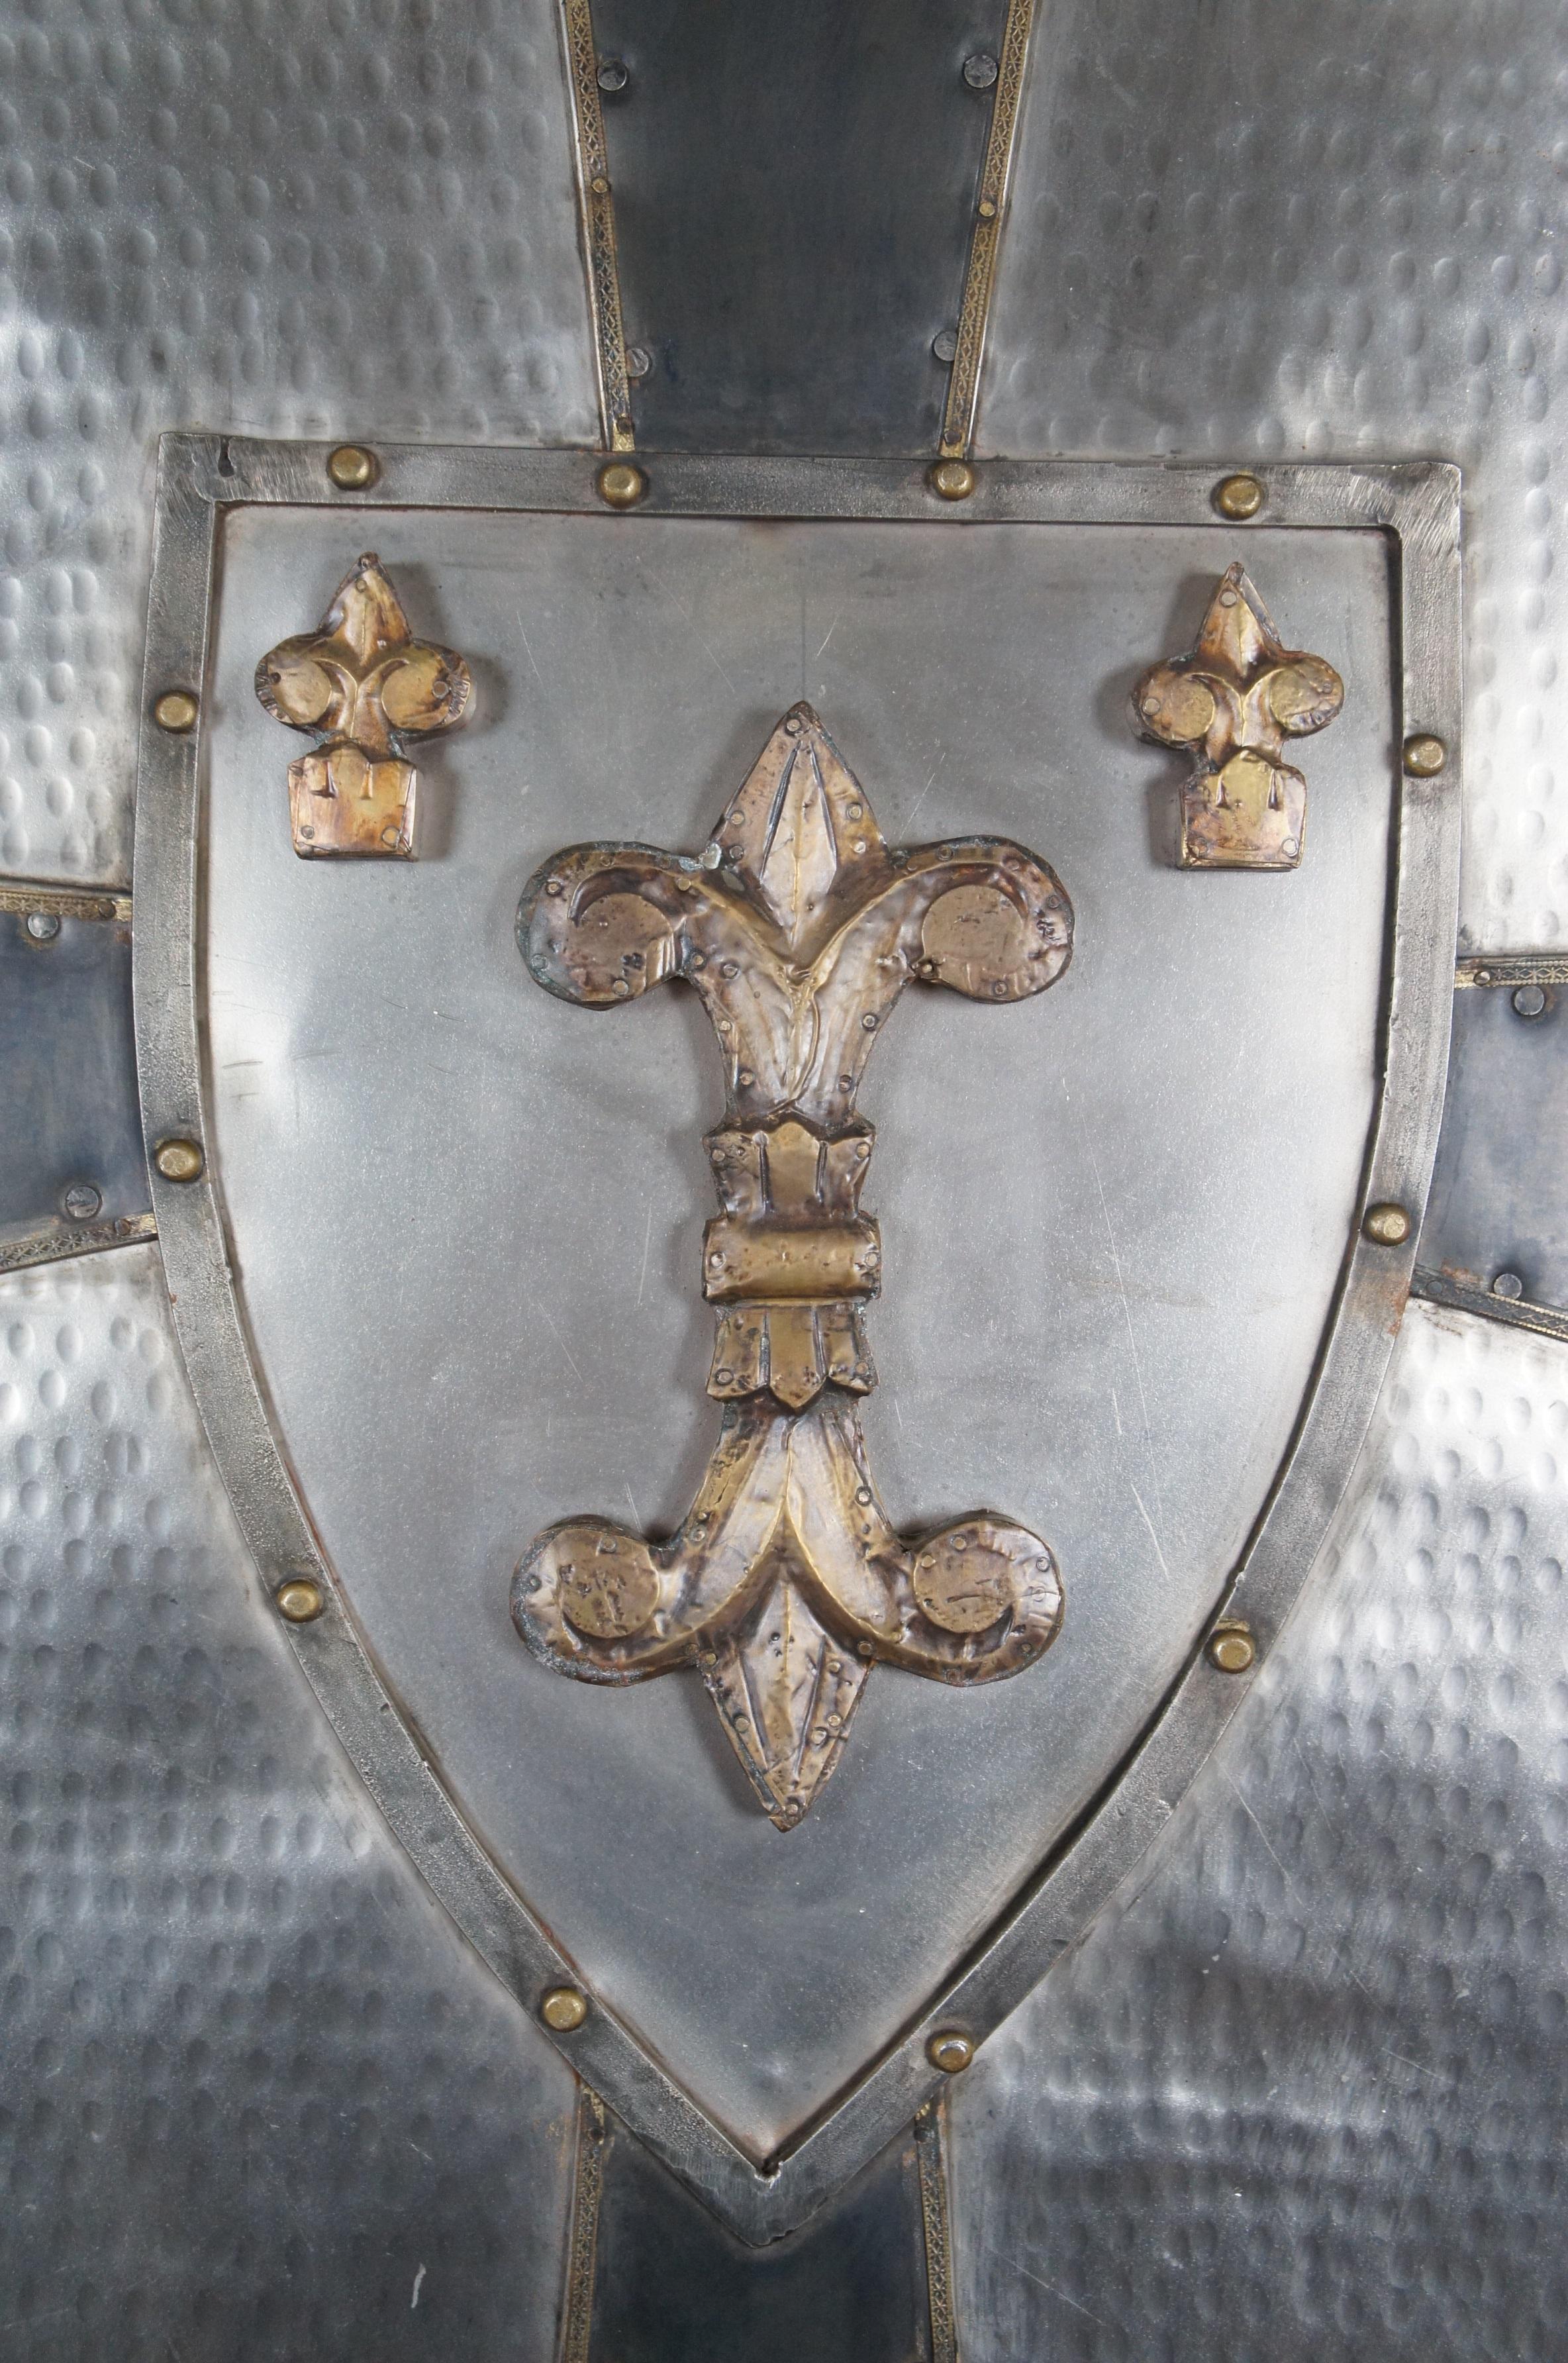 20th Century Charlemagne Hammered Metal French Crusader Knights Shield Fleur de Lis 32